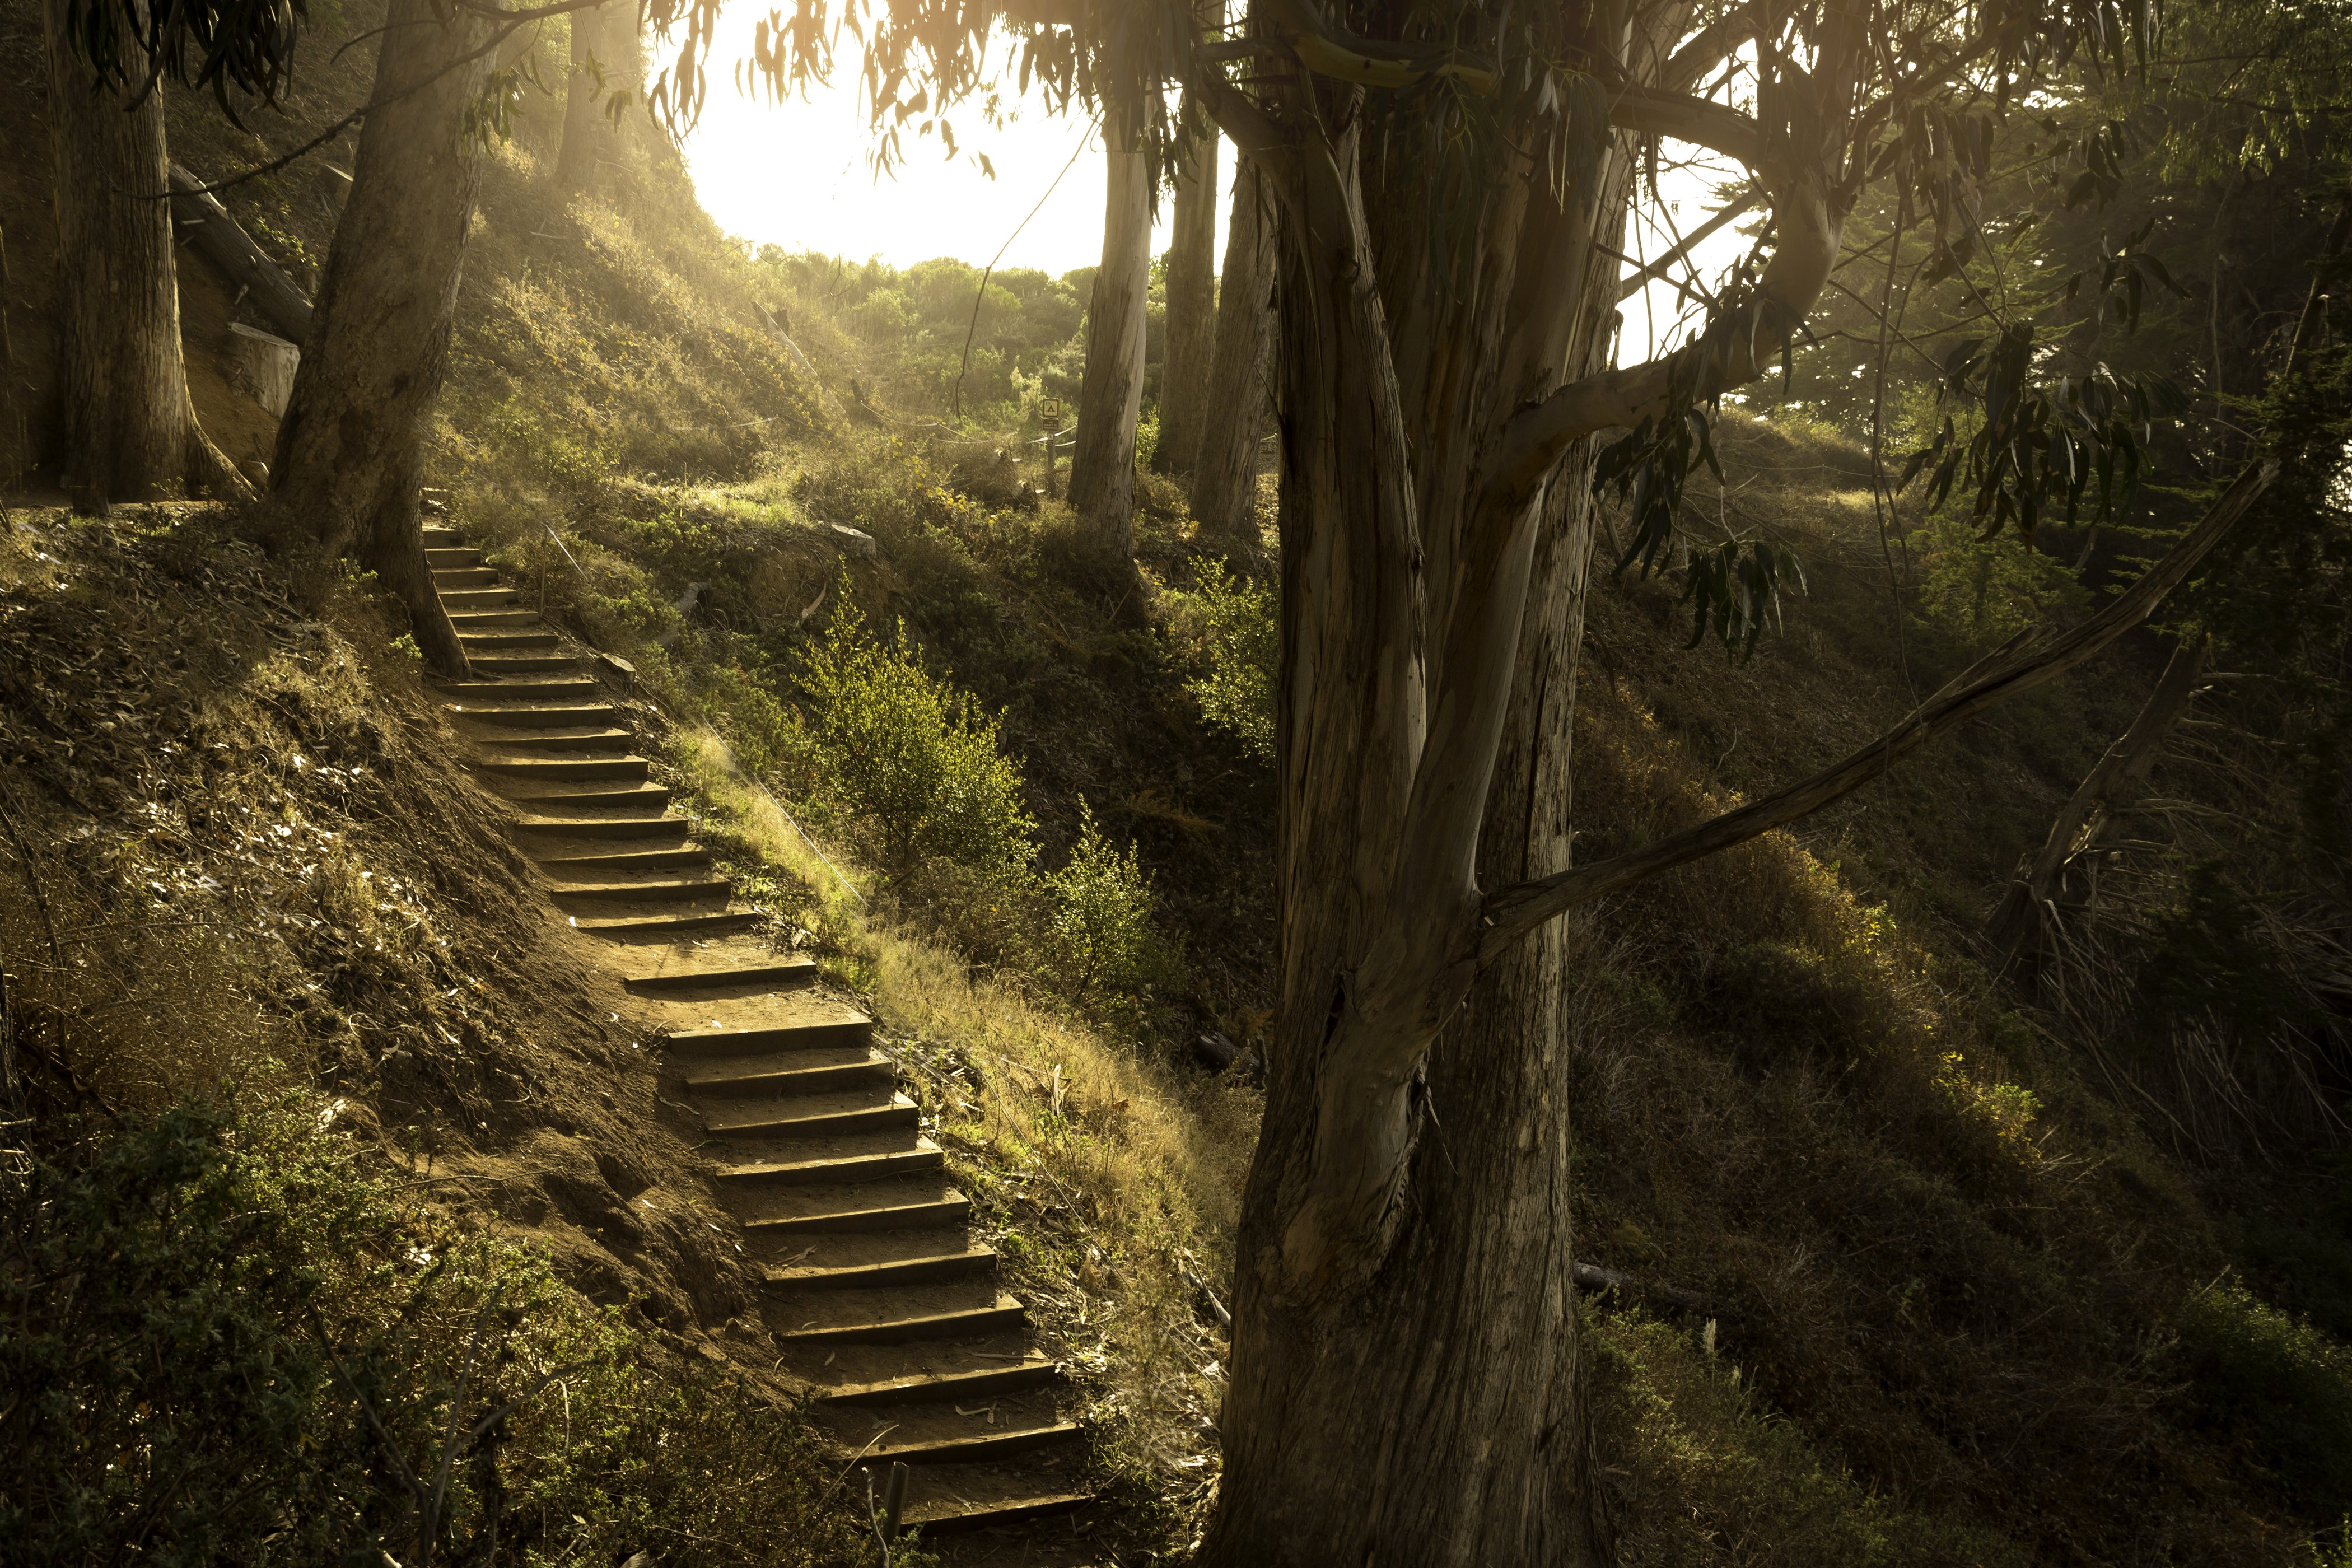 usa, Parks, California, Stairs, Trunk, Tree, Nature Wallpaper